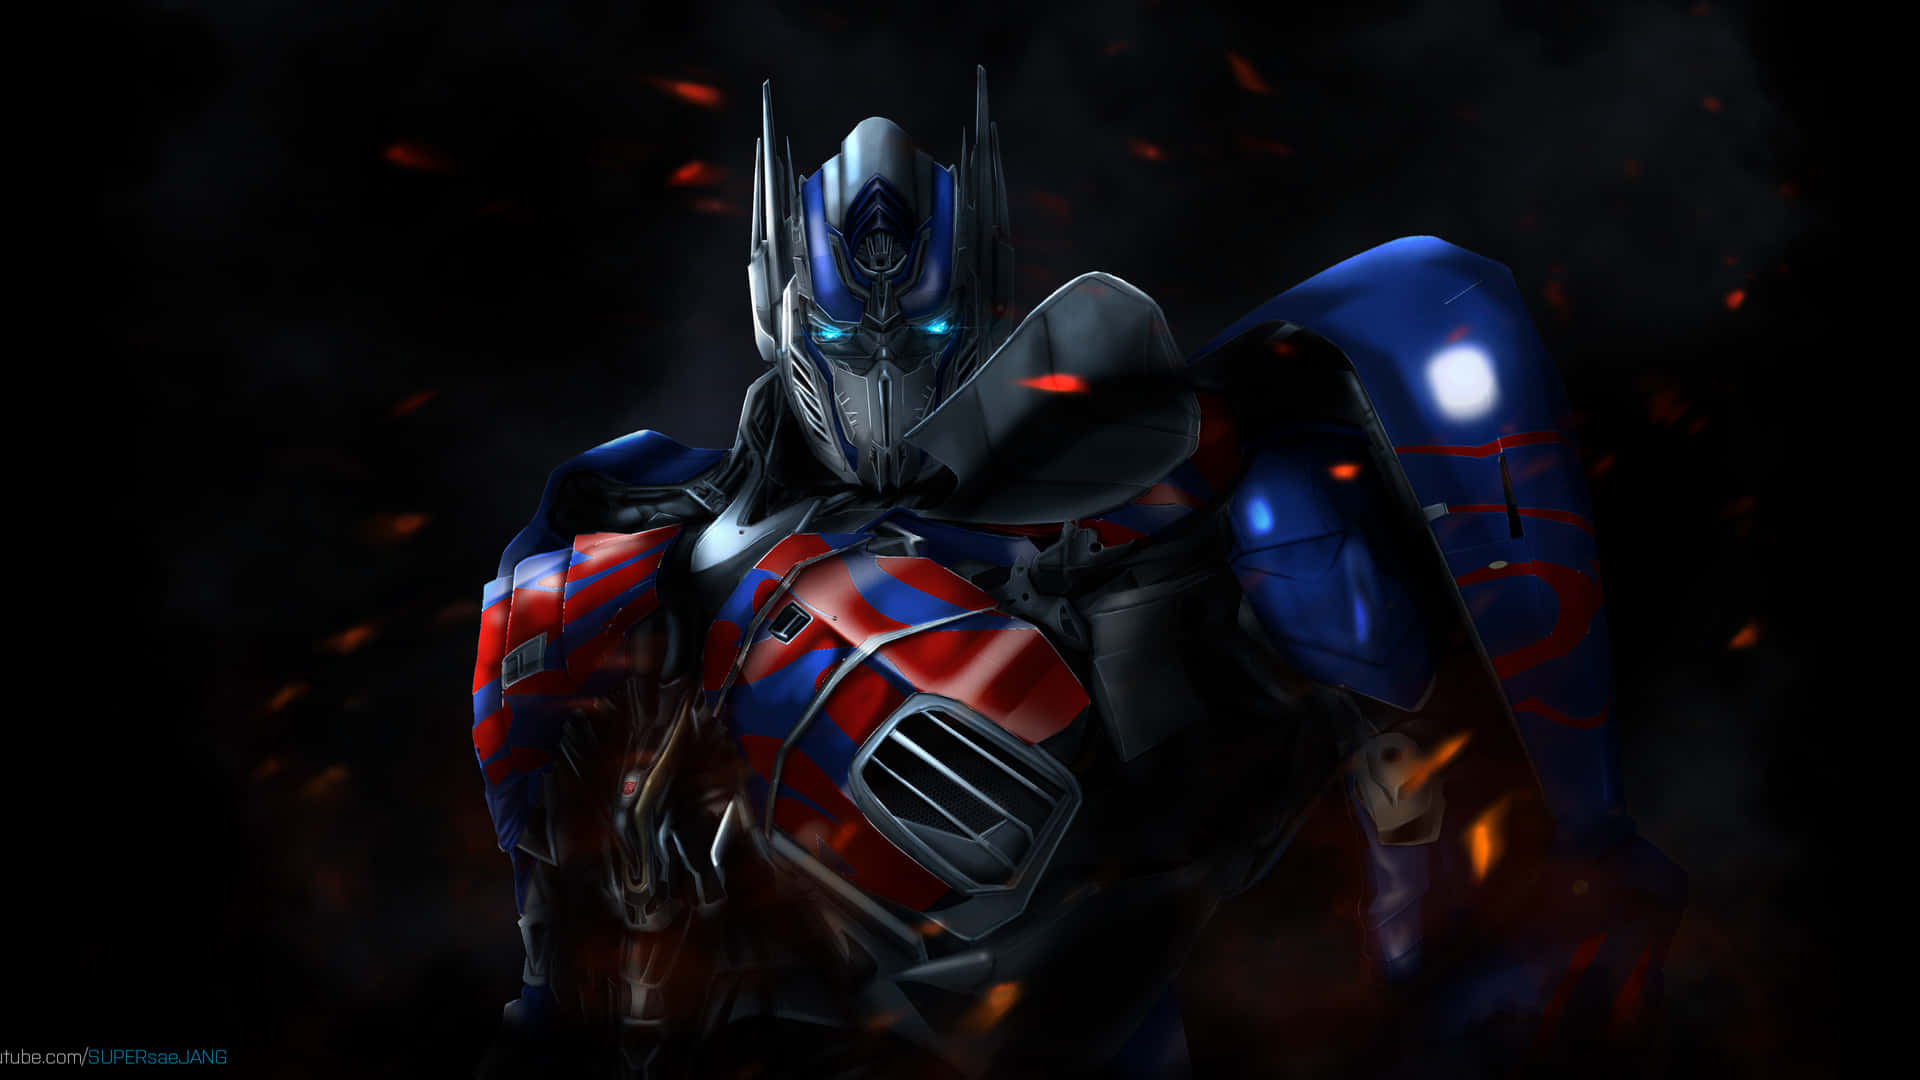 Optimus Prime stands strong in 4K Wallpaper